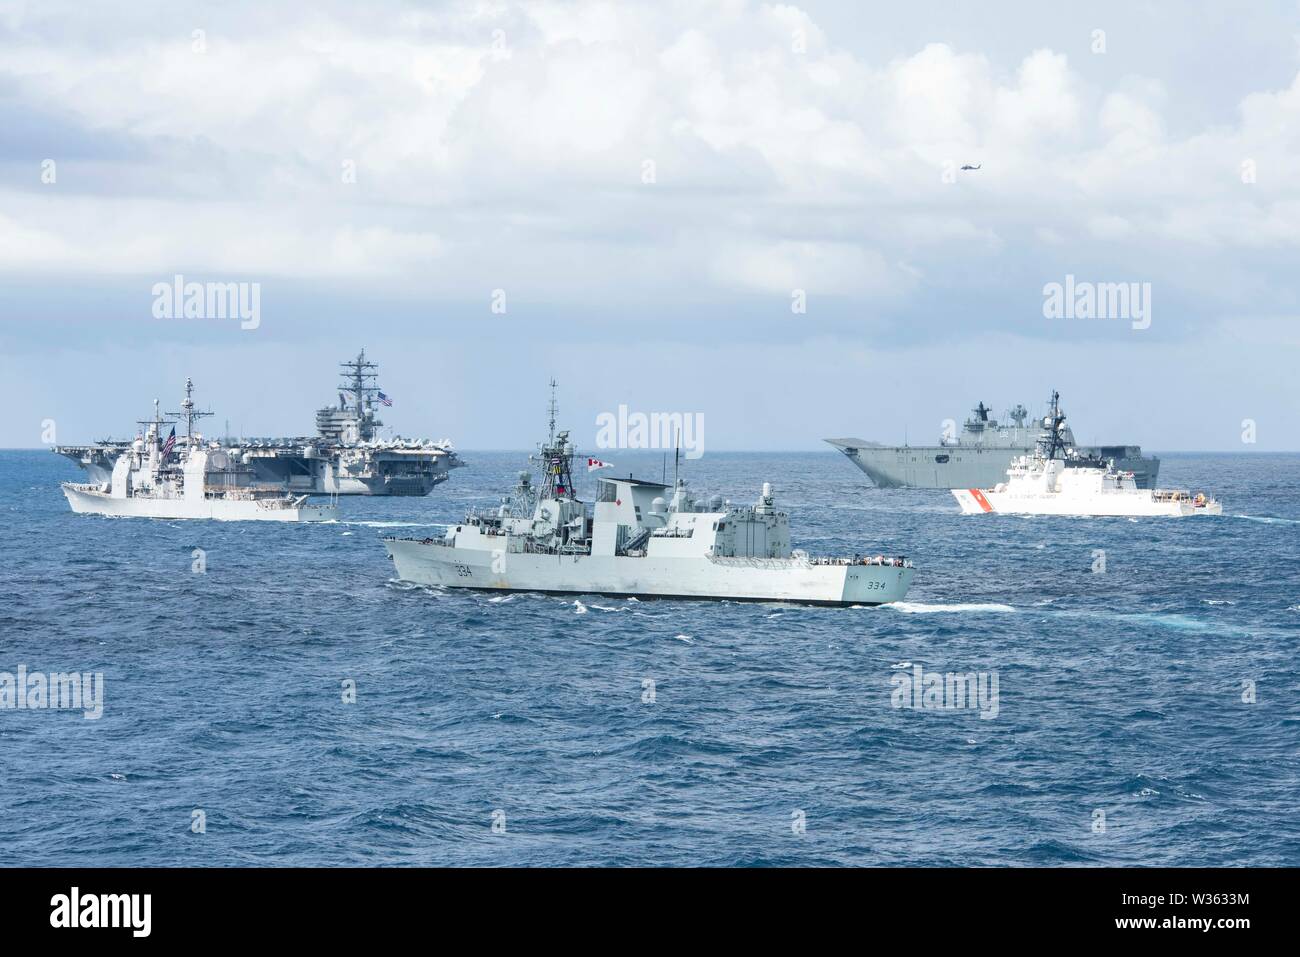 190711-N-DX072-1052 TASMAN SEA (July 11, 2019) The U.S. Navy Nimitz-class aircraft carrier USS Ronald Reagan (CVN 76), top left, the U.S. Navy Ticonderoga-class guided-missile cruiser USS Chancellorsville (CG 62), left, the Royal Canadian Navy Halifax-class frigate HMCS Regina (FFH 334), center, the Royal Australian Navy Canberra-class landing helicopter dock ship HMAS Canberra (L02), top right, and the Legend-class cutter USCGC Stratton (WMSL 752), right, transit by the amphibious transport dock ship USS Green Bay (LPD 20) in a photo exercise (PHOTOEX) during Talisman Sabre 2019. Green Bay, p Stock Photo